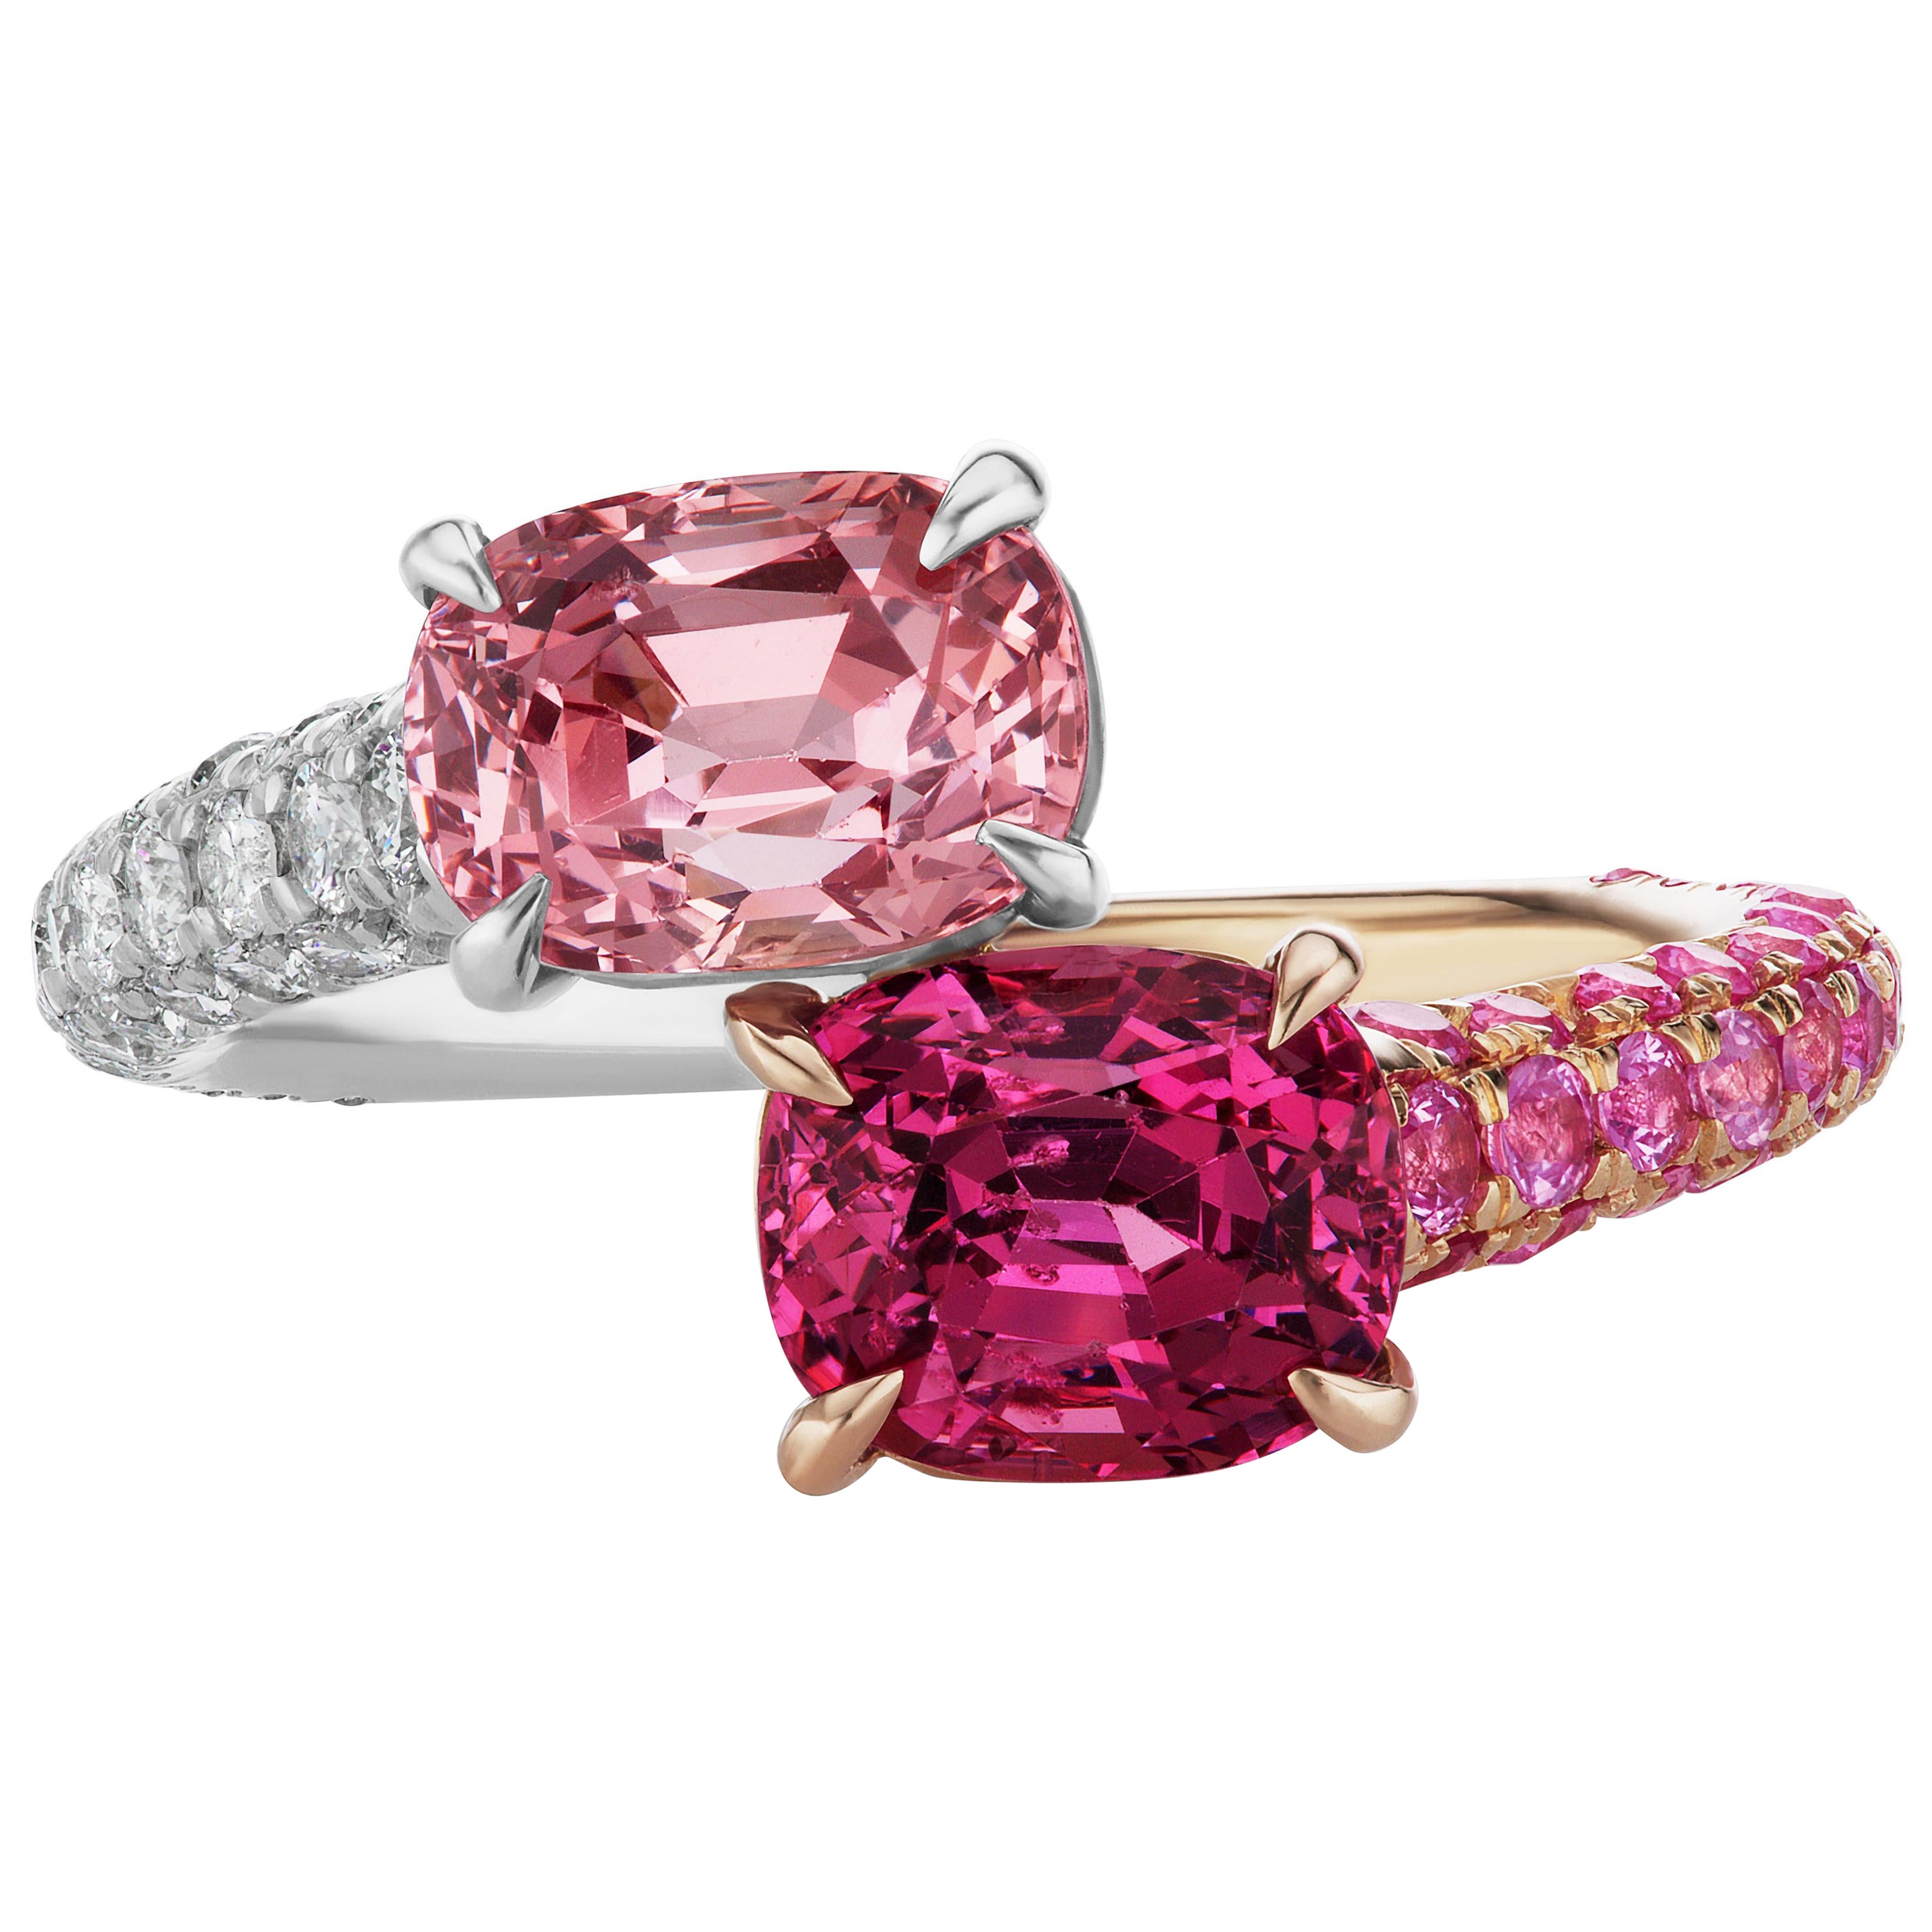 Spinel, Sapphire and Diamond Toi et Moi Platinum and 18k Rose Gold Ring